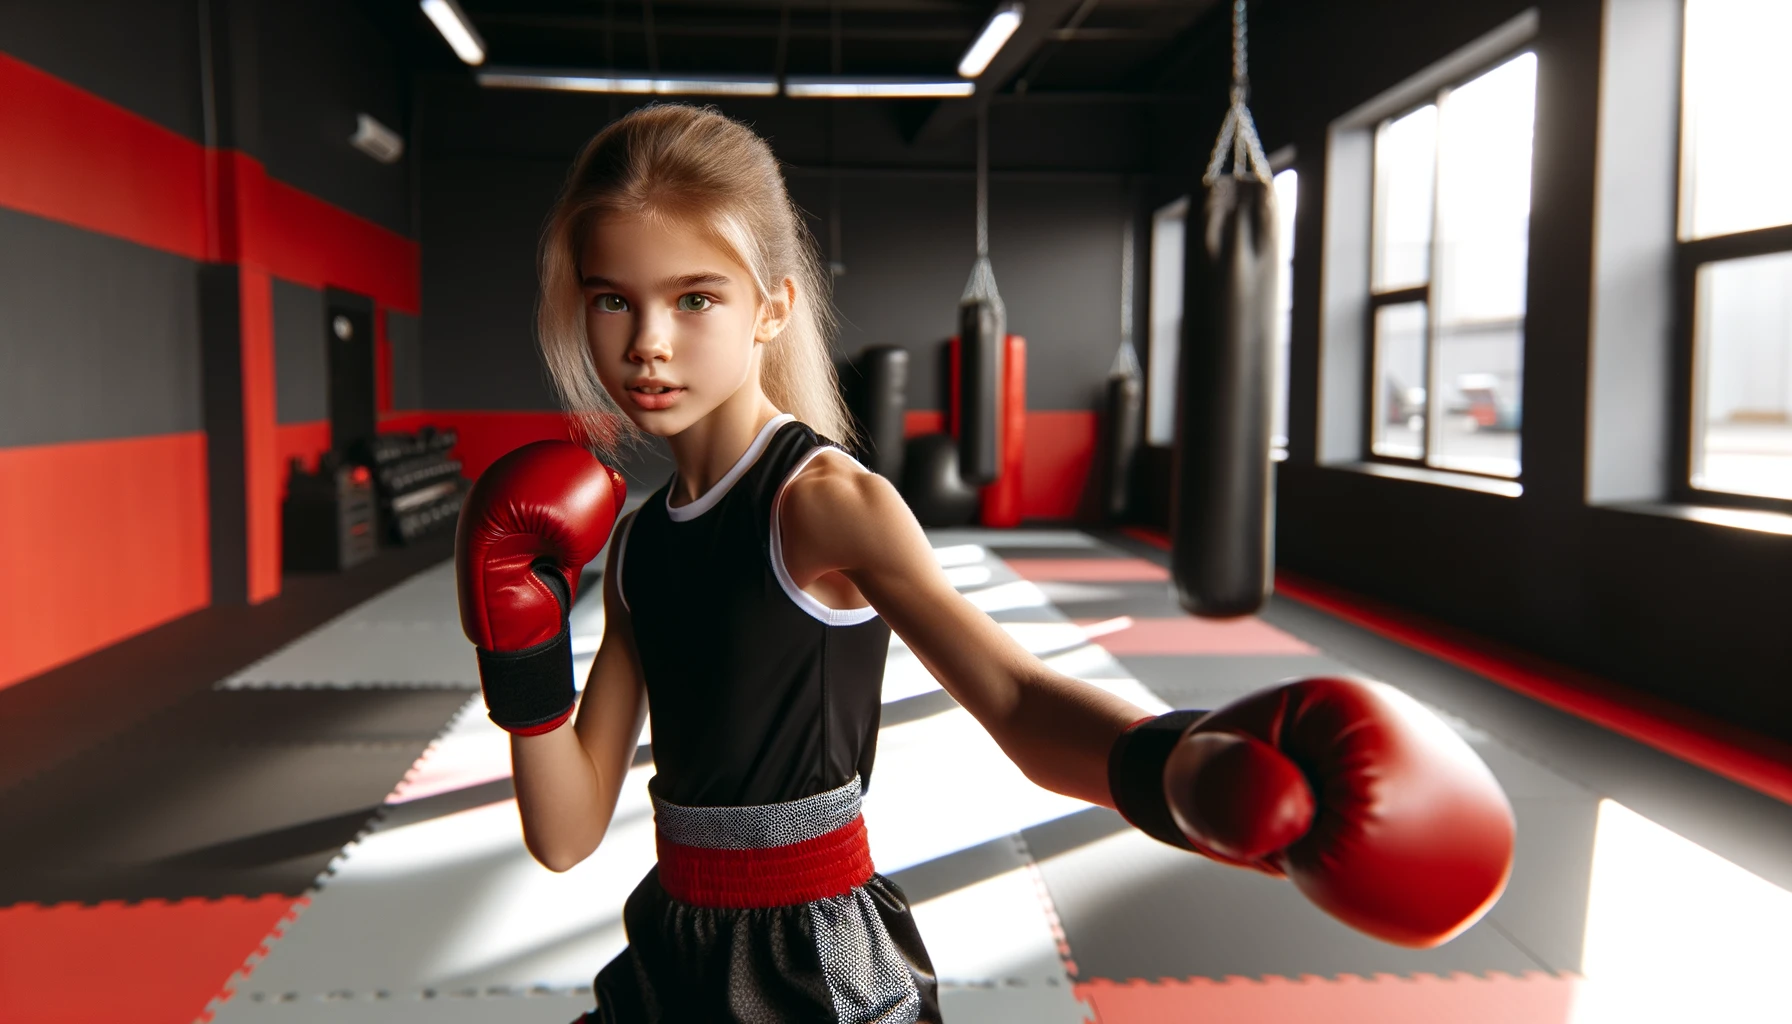 DALL·E 2023-11-21 12.19.16 - A full-body portrait of a young Caucasian girl, around 10 years old, with blonde hair, in a martial arts gym. She is in a dynamic boxing pose with her